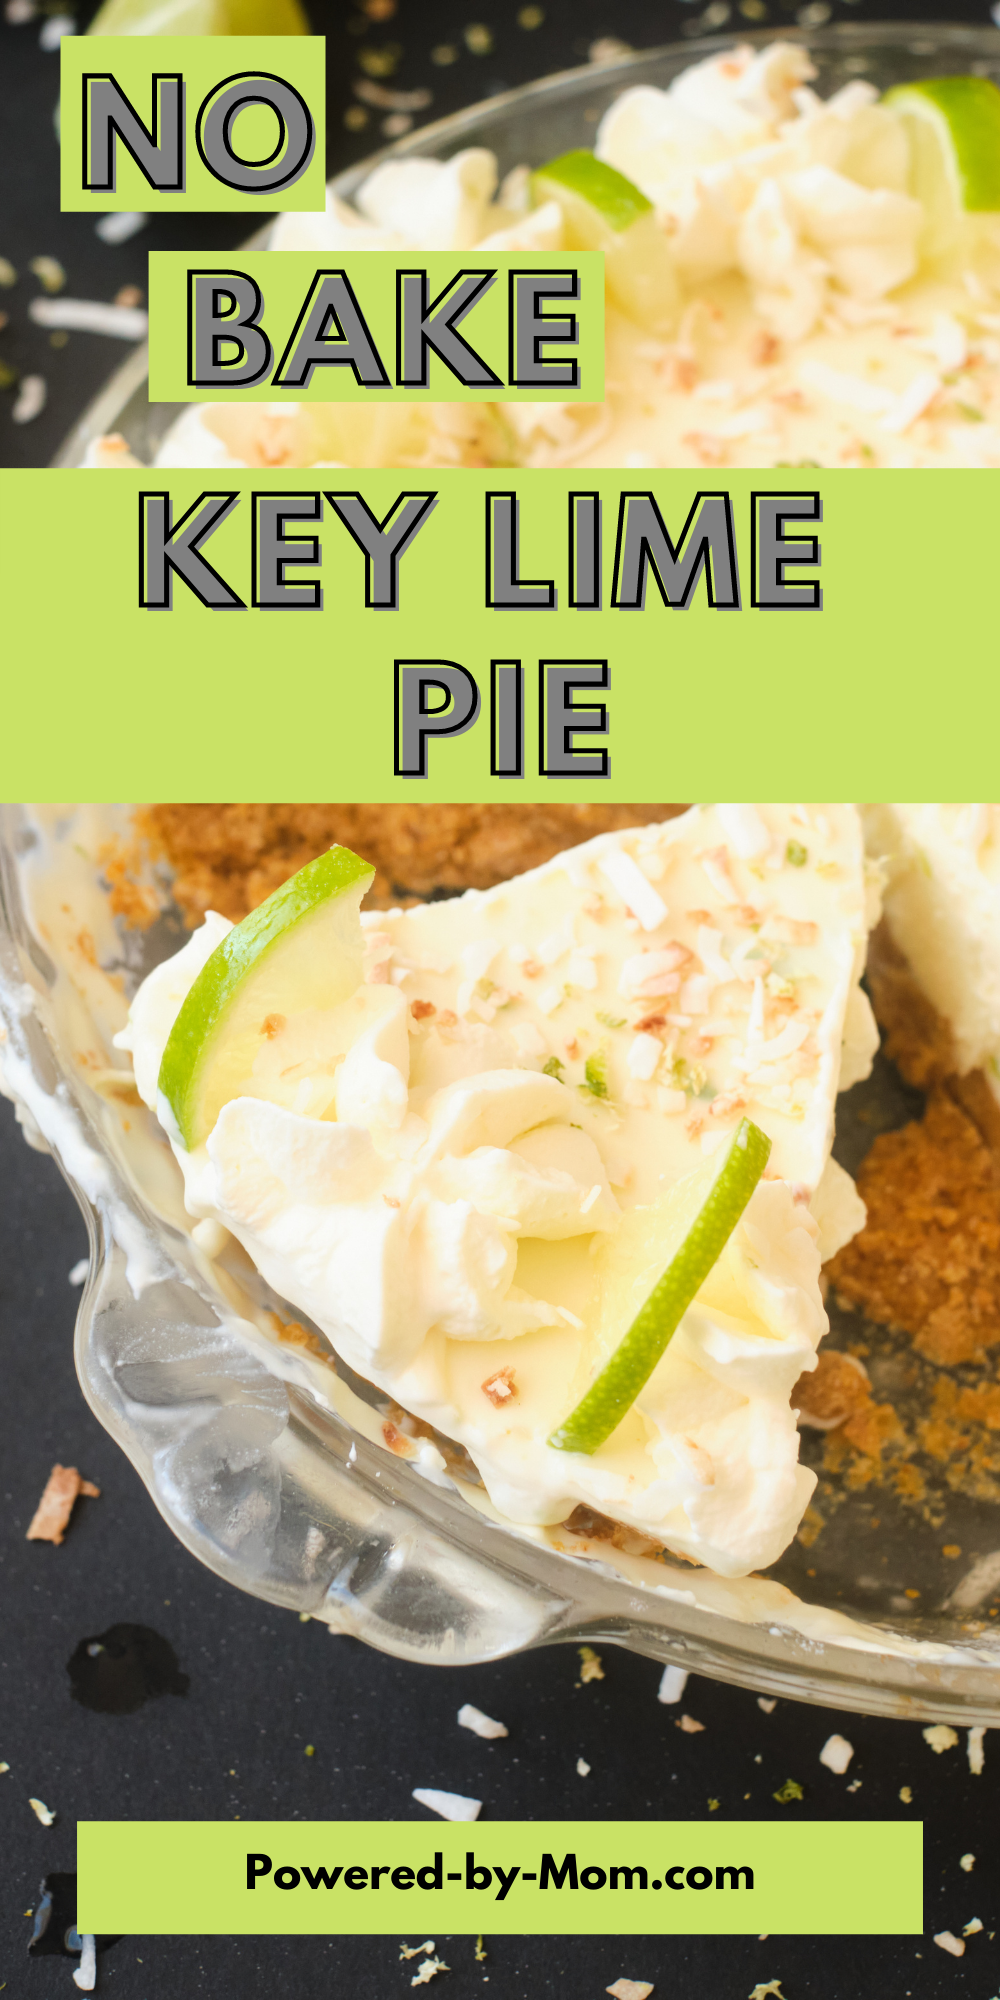 This No Bake Key Lime Pie Recipe is a delicious dessert, especially in the summer! It's creamy and tangy and topped with toasted coconut.